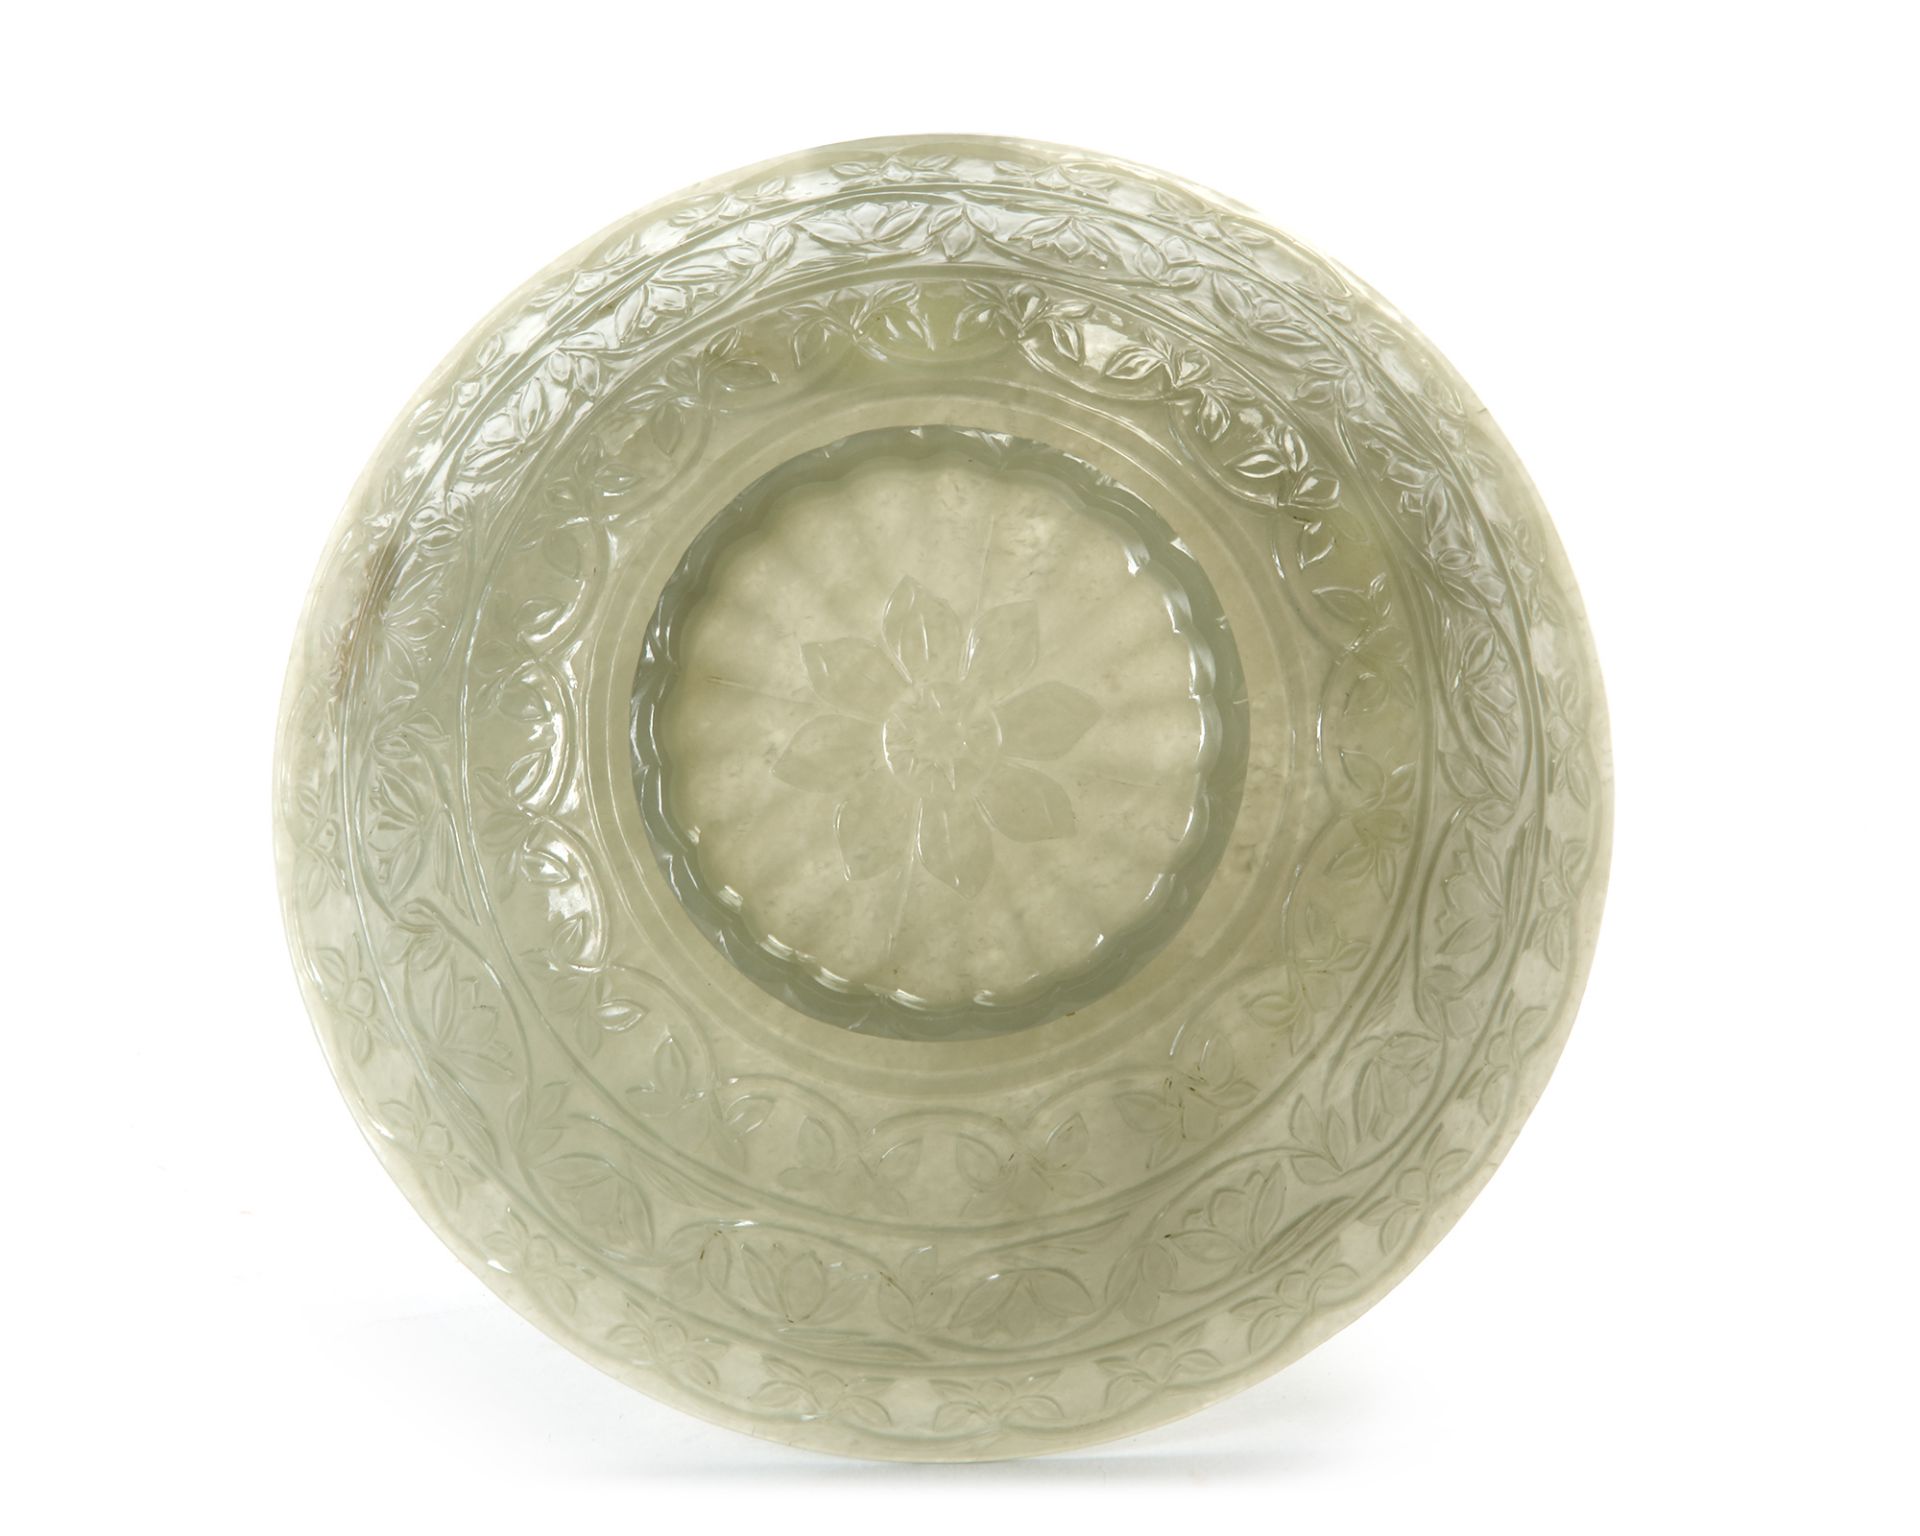 A CELADON JADE MUGHAL-STYLE BOWL, 17TH CENTURY - Image 8 of 10